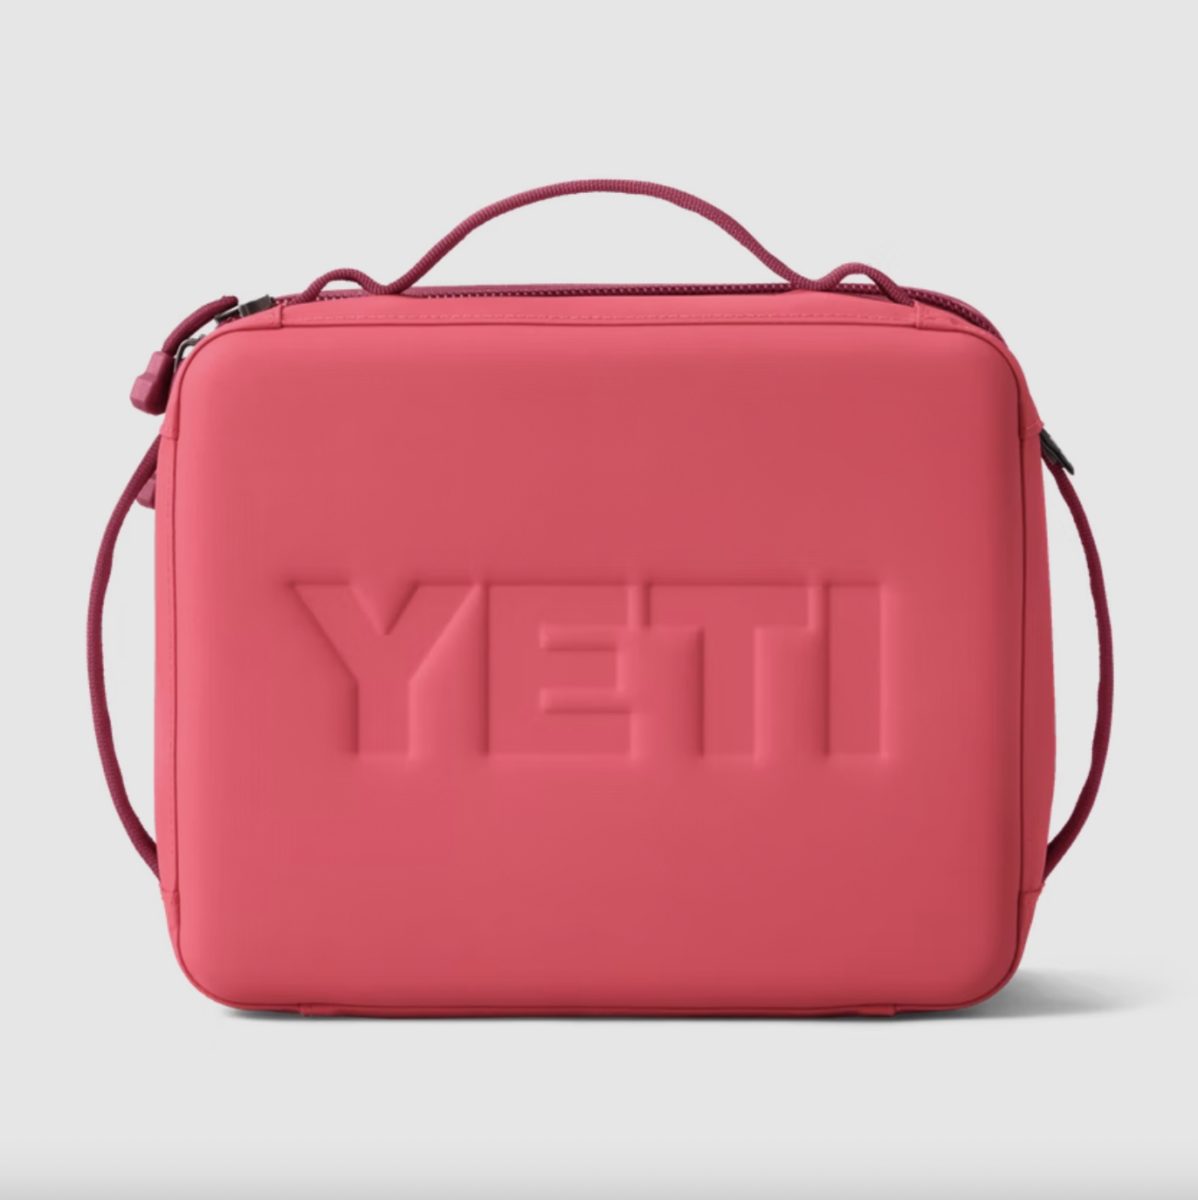 yeti lunch boxes